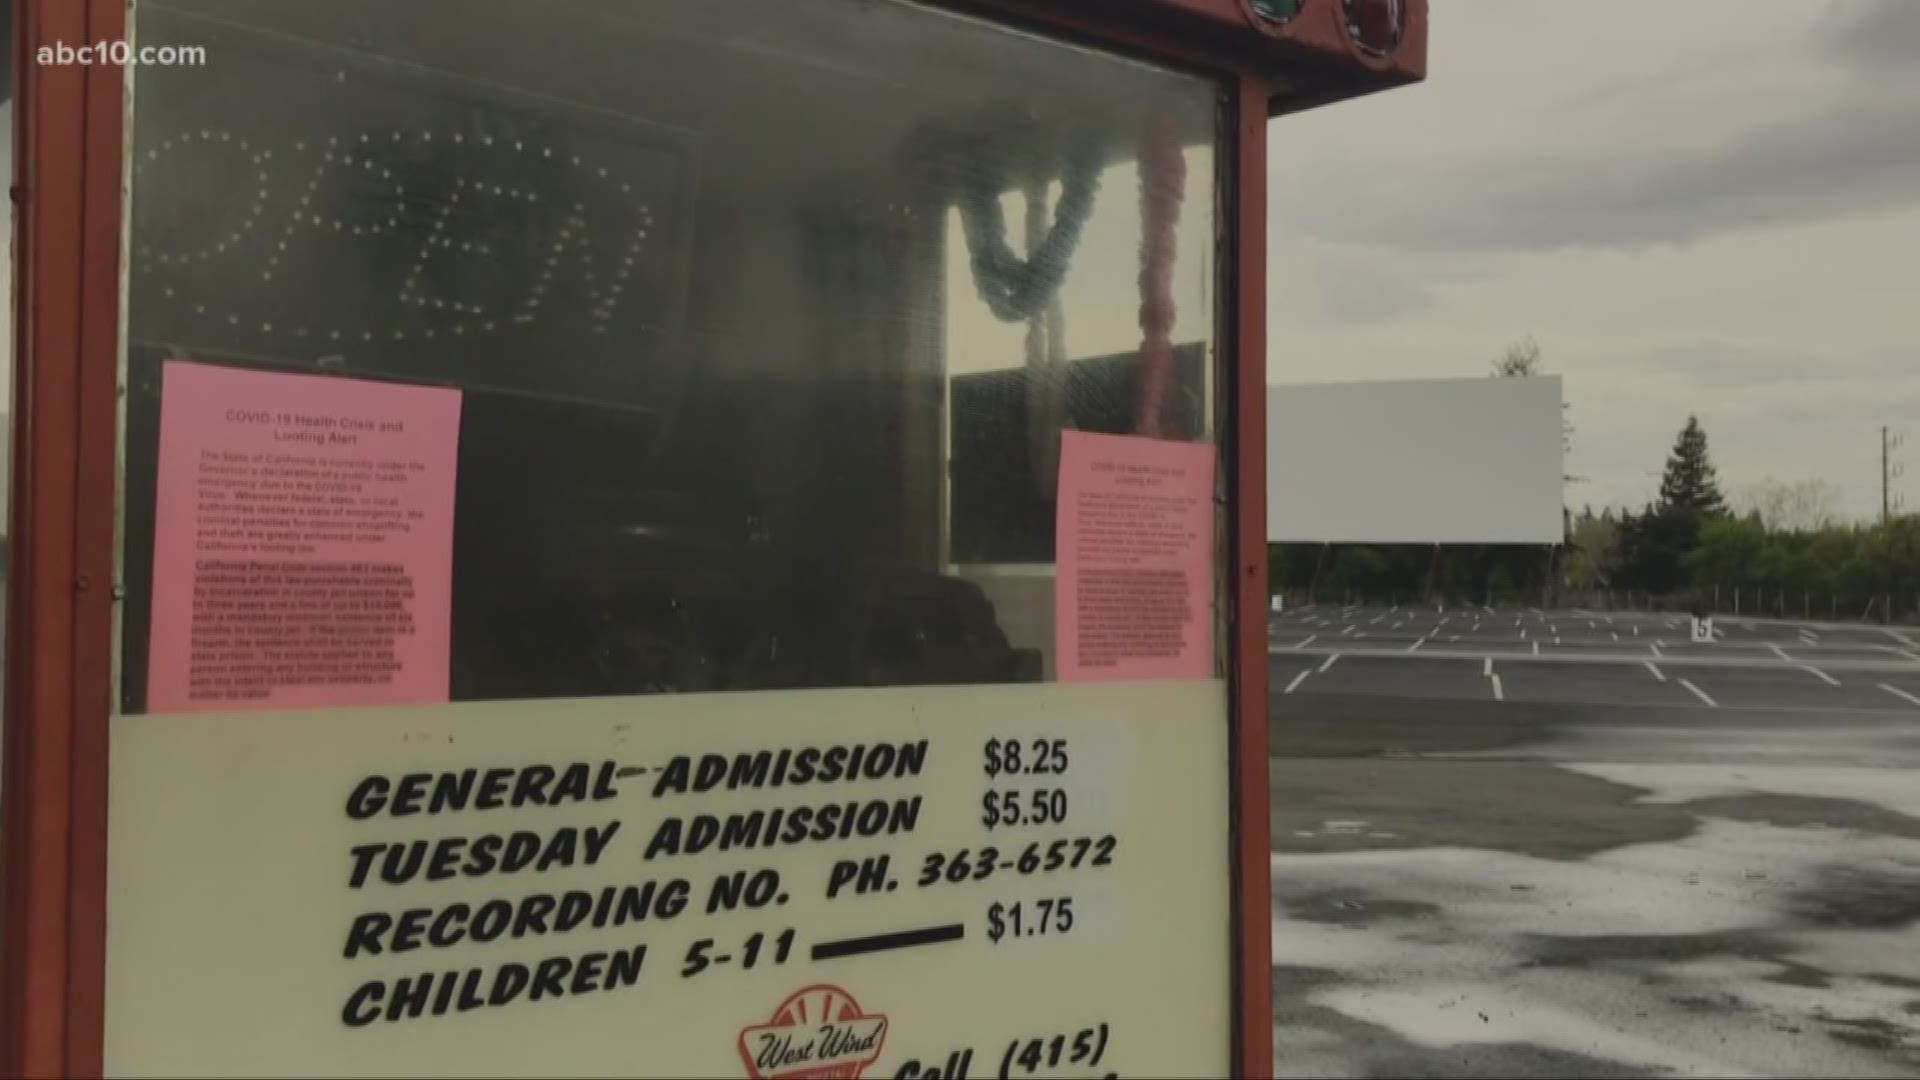 The West Wind Drive-In movie theater is reopening while the state's stay at home order is still in effect.